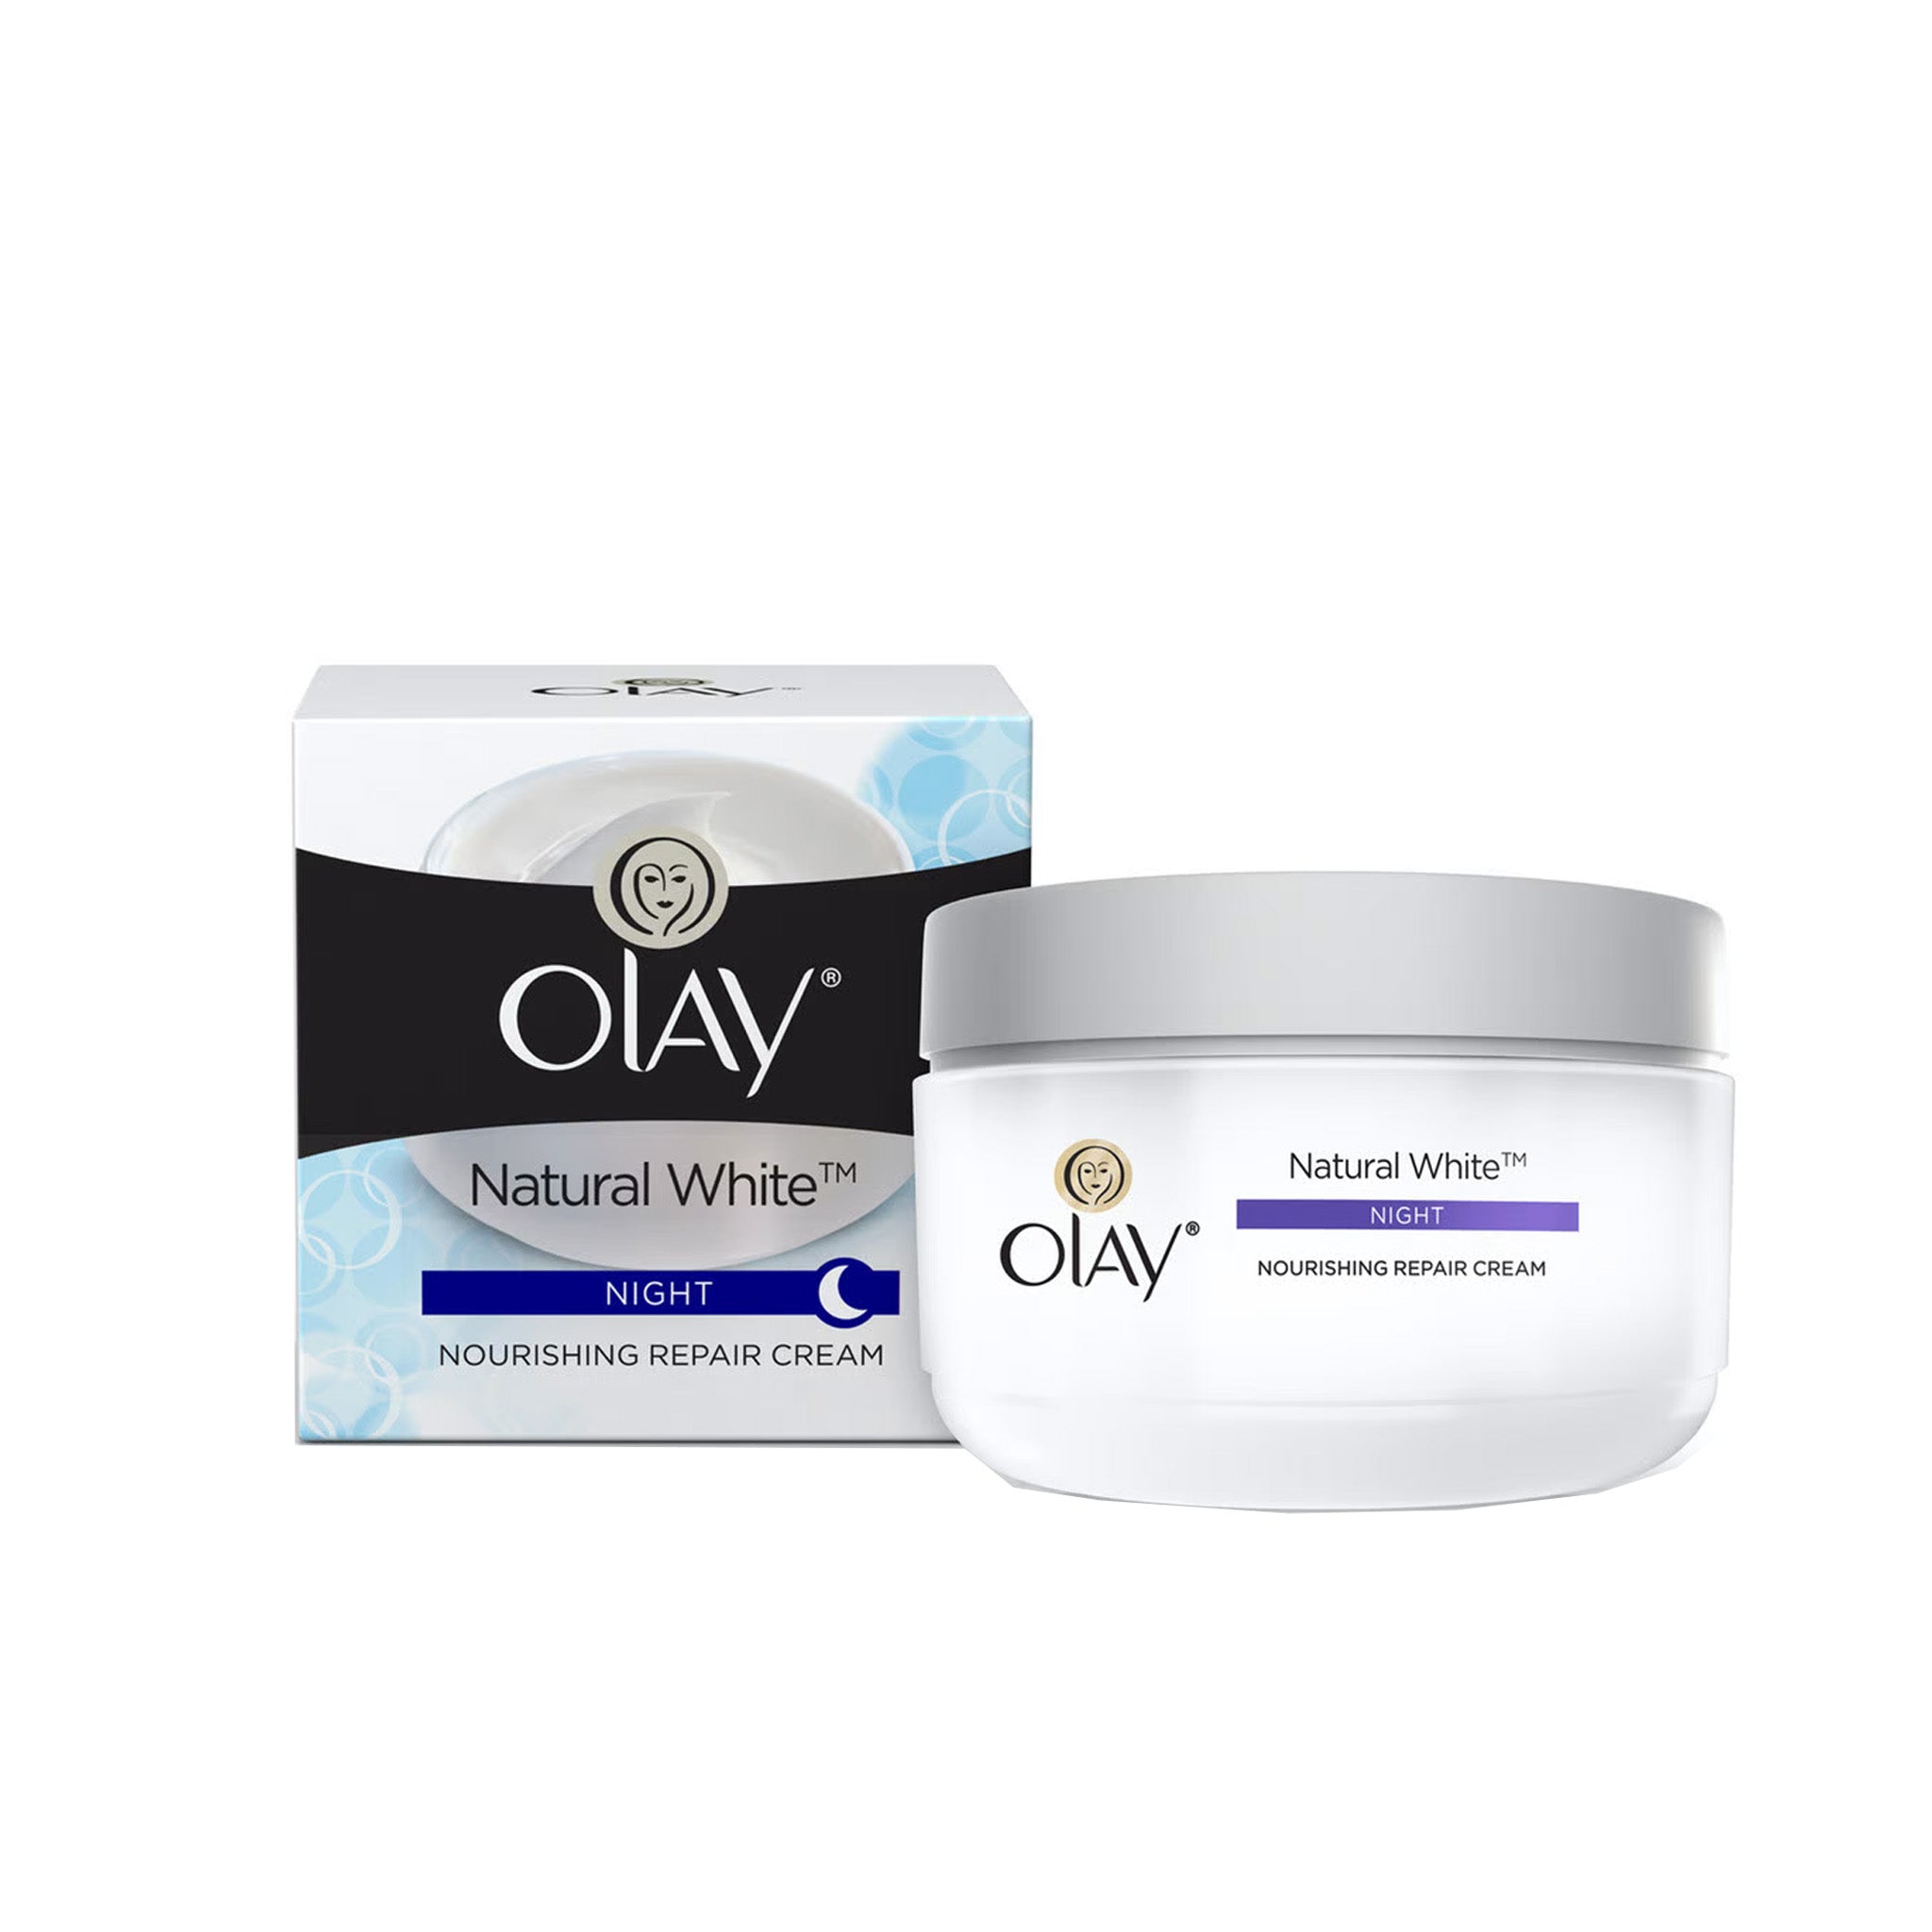 Olay Natural white Night cream all in one 50g